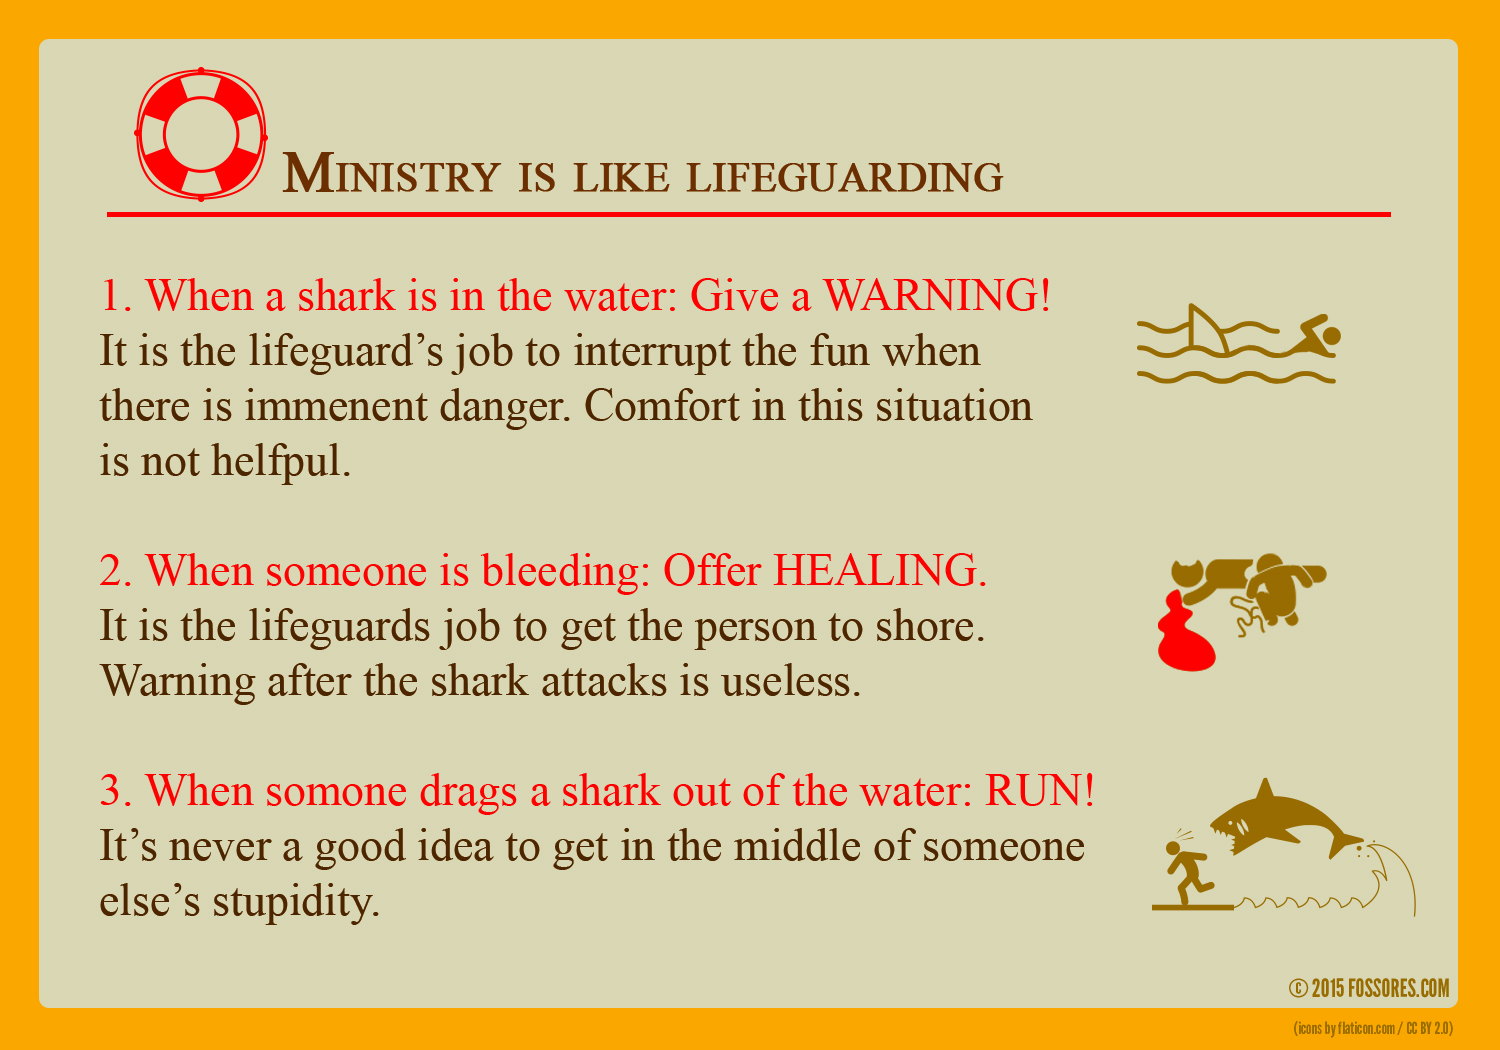 Ministry is like lifeguarding